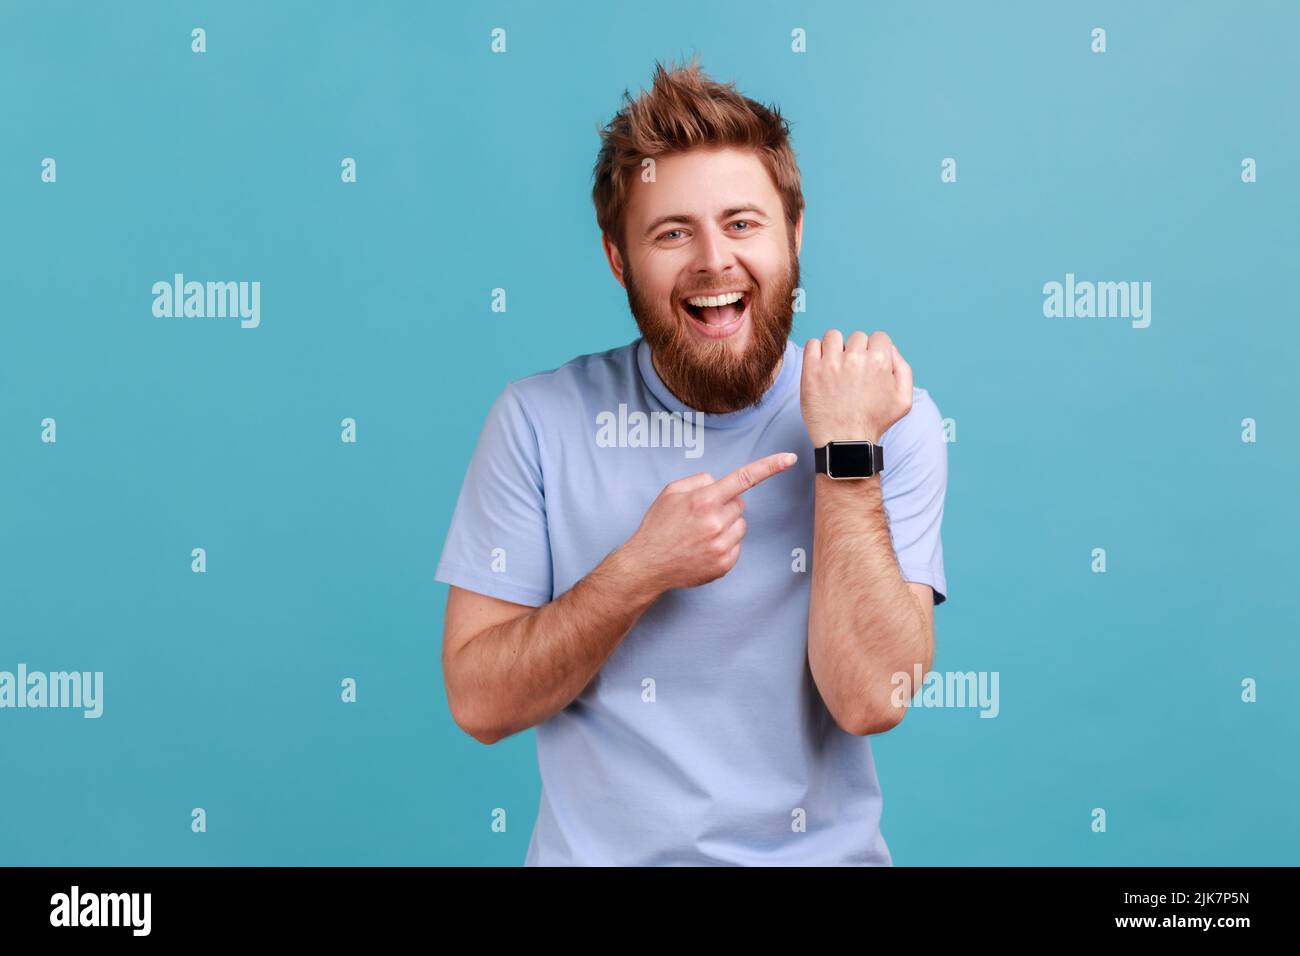 Portrait of positive funny bearded man standing with open mouth and satisfied expression, pointing with finger ar smartwatch and laughing. Indoor studio shot isolated on blue background. Stock Photo